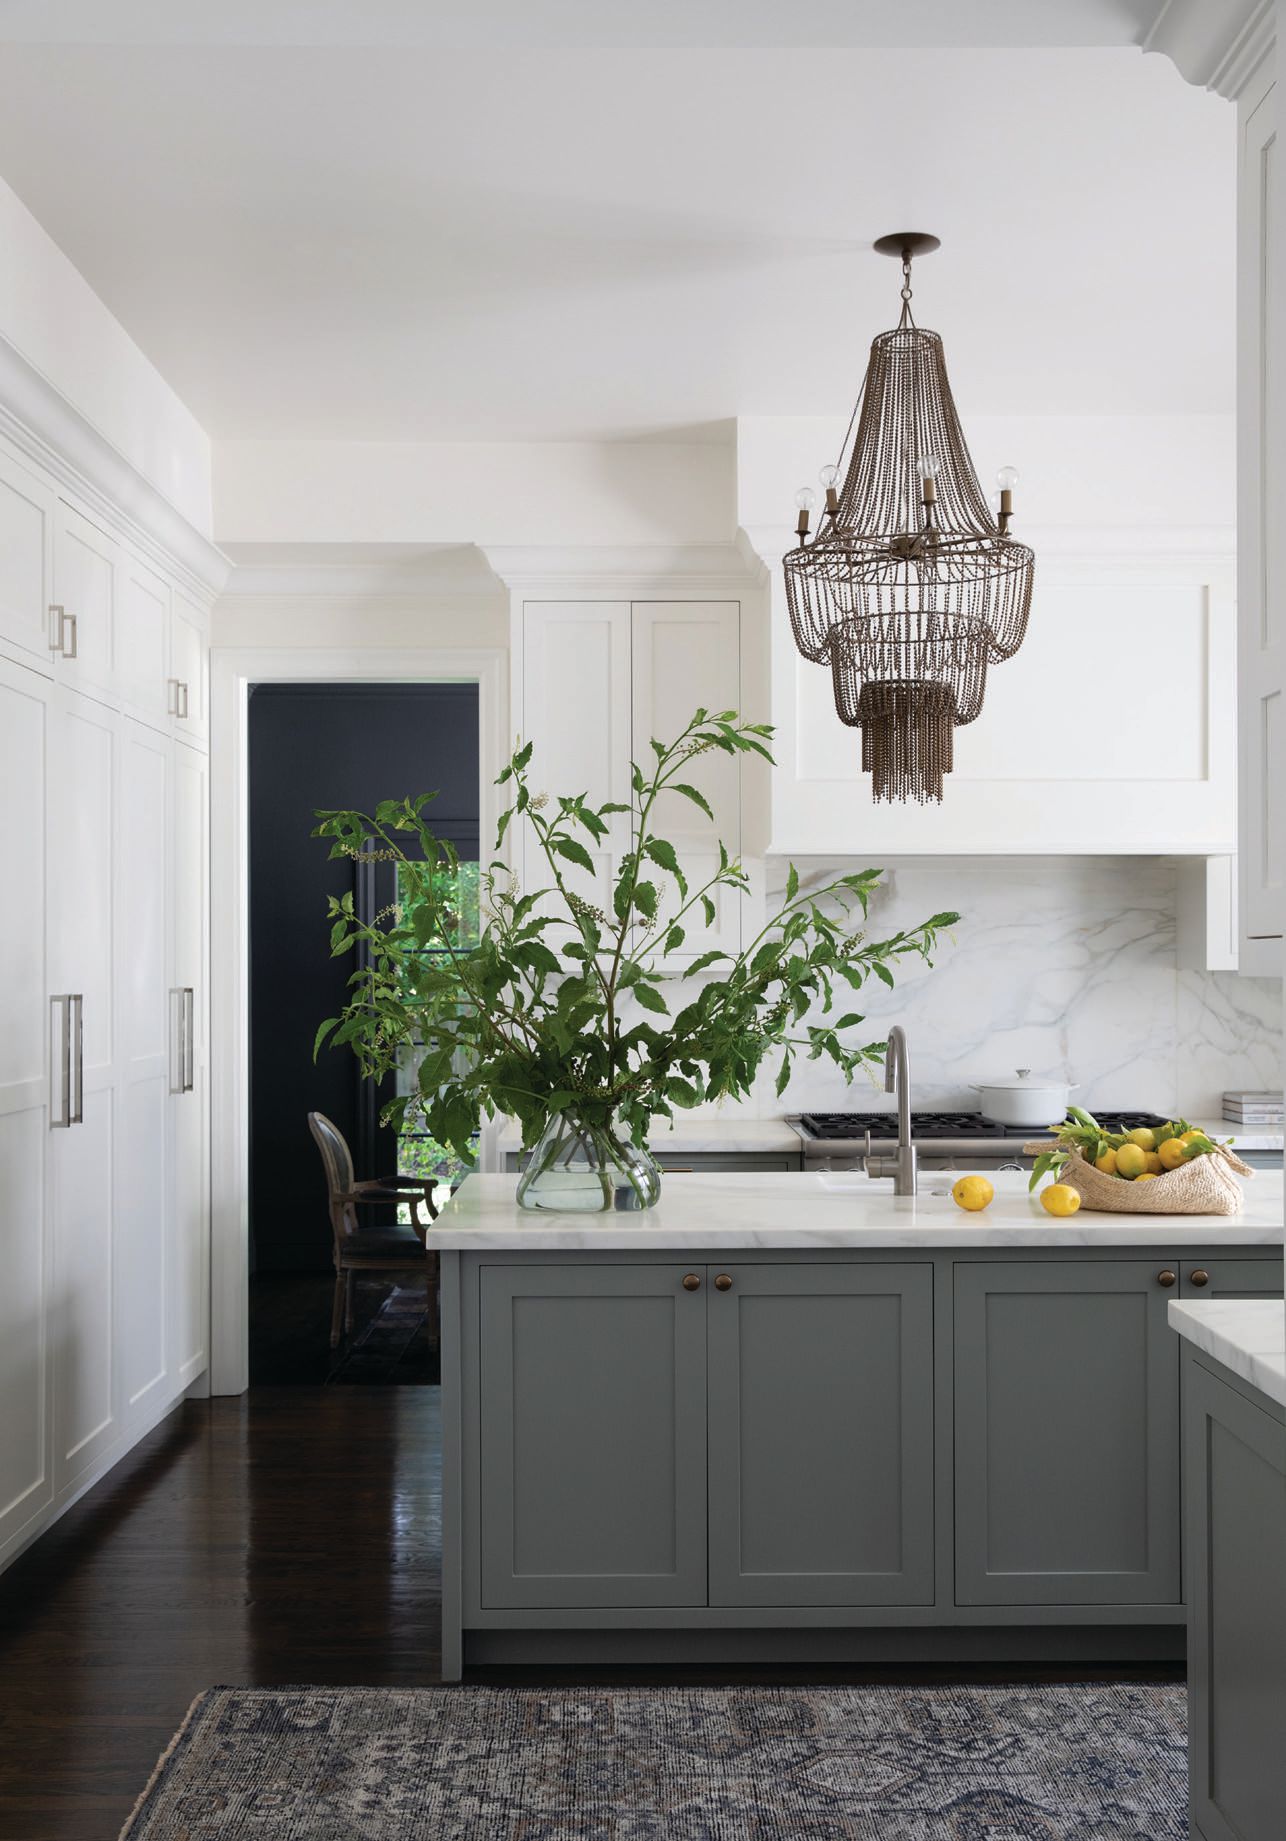 The kitchen shines with hardware from the Aspen Collection by Top Knobs, which is complemented by cabinets dressed with Benjamin Moore Simply White paint that contrasts the lower cabinets painted with Farrow & Ball’s Pigeon hue. The chandelier comes from Arteriors Home.  PHOTOGRAPHED BY BESS FRIDAY